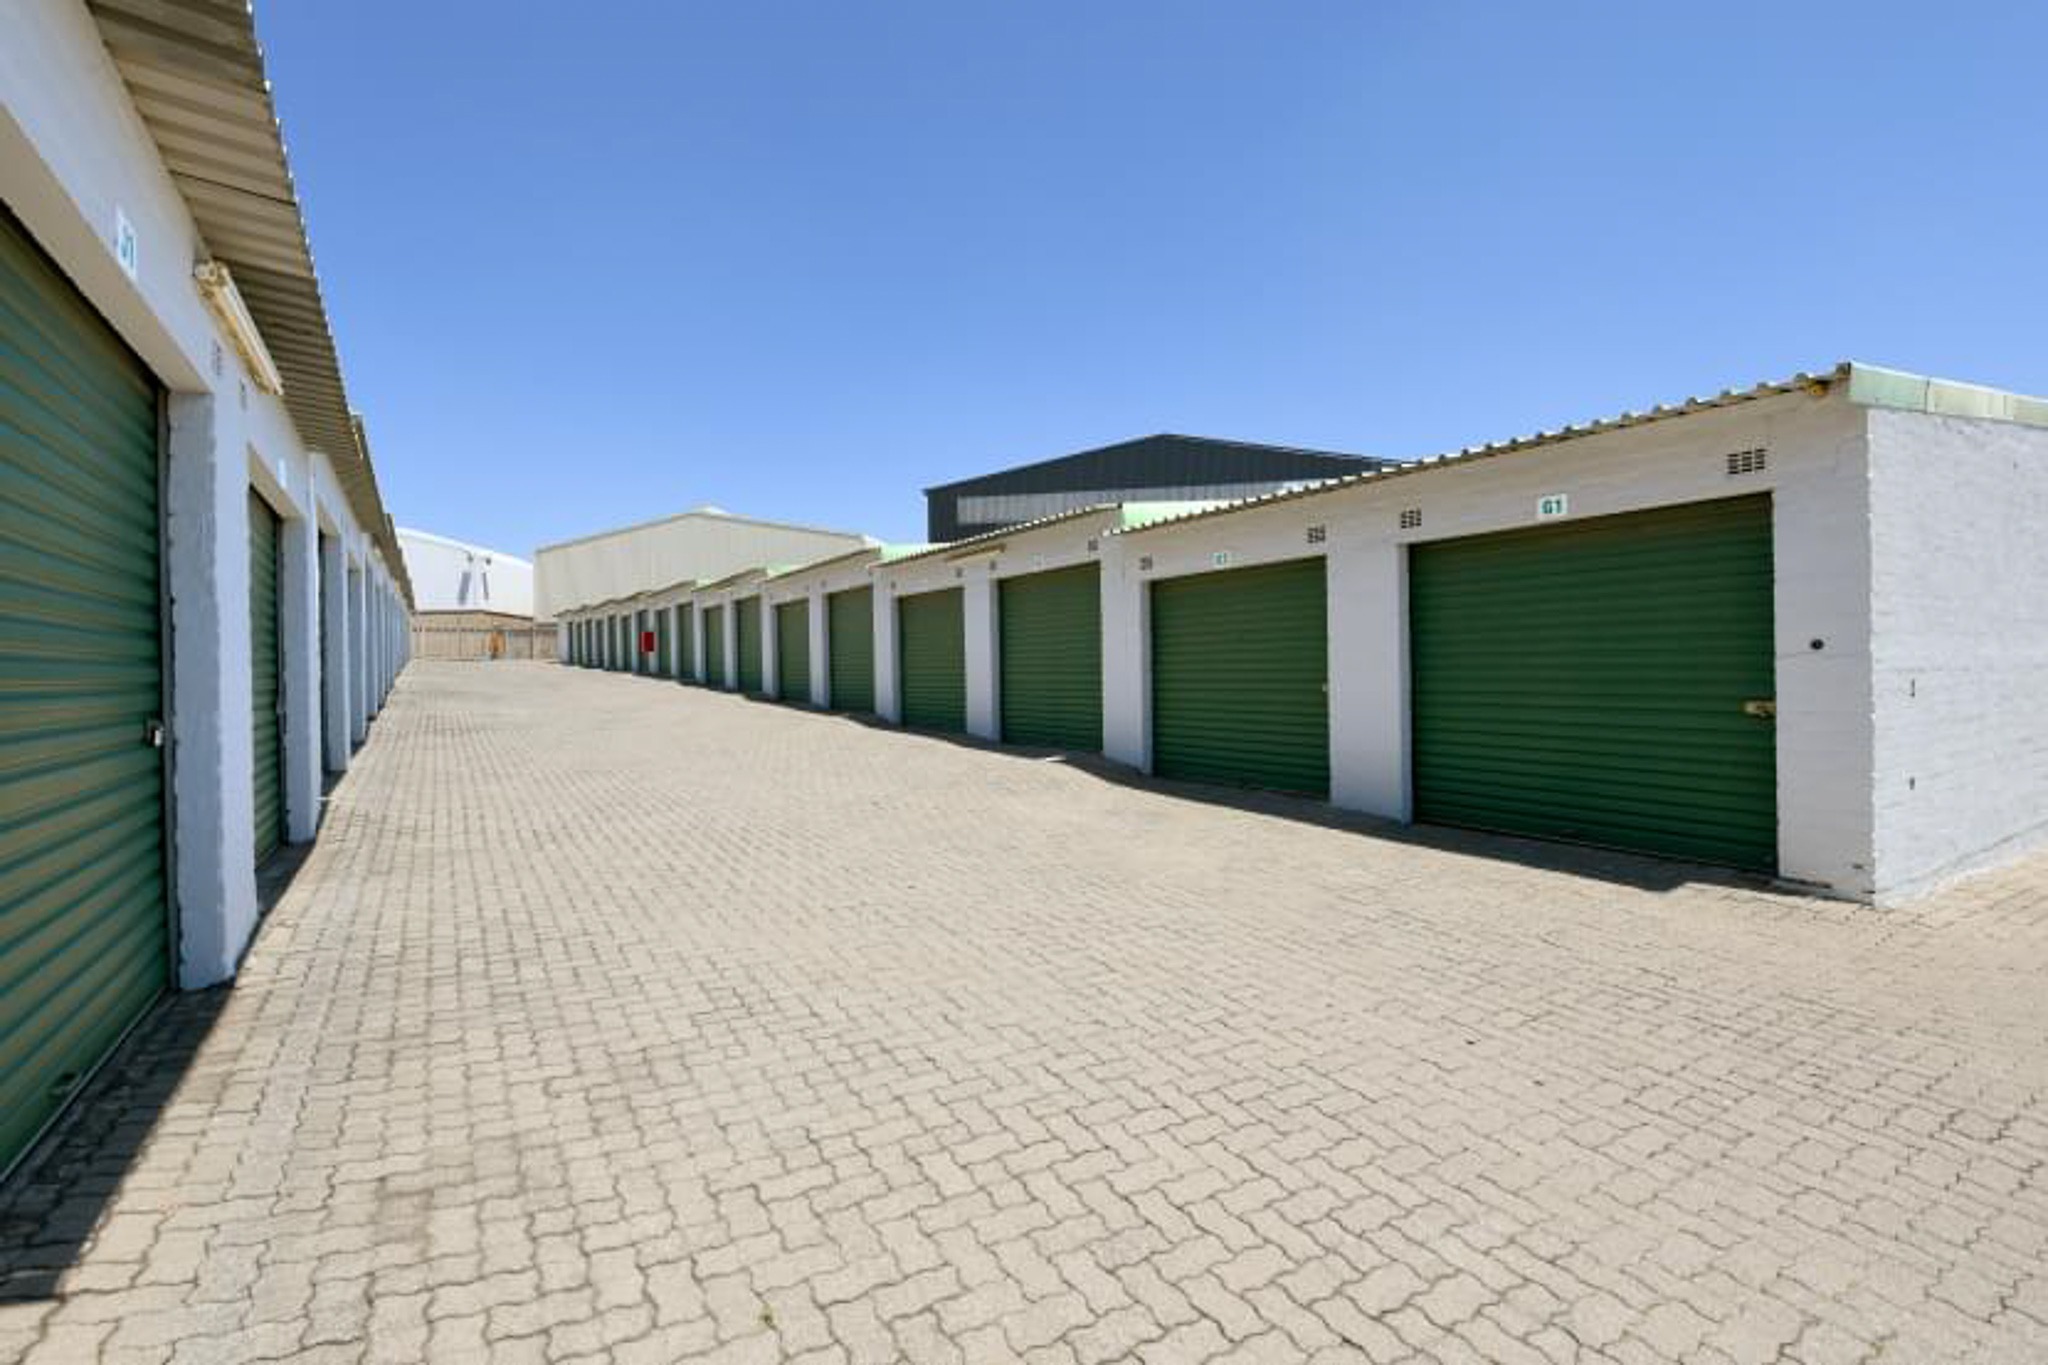 A row of storage units with white paint and green doors.